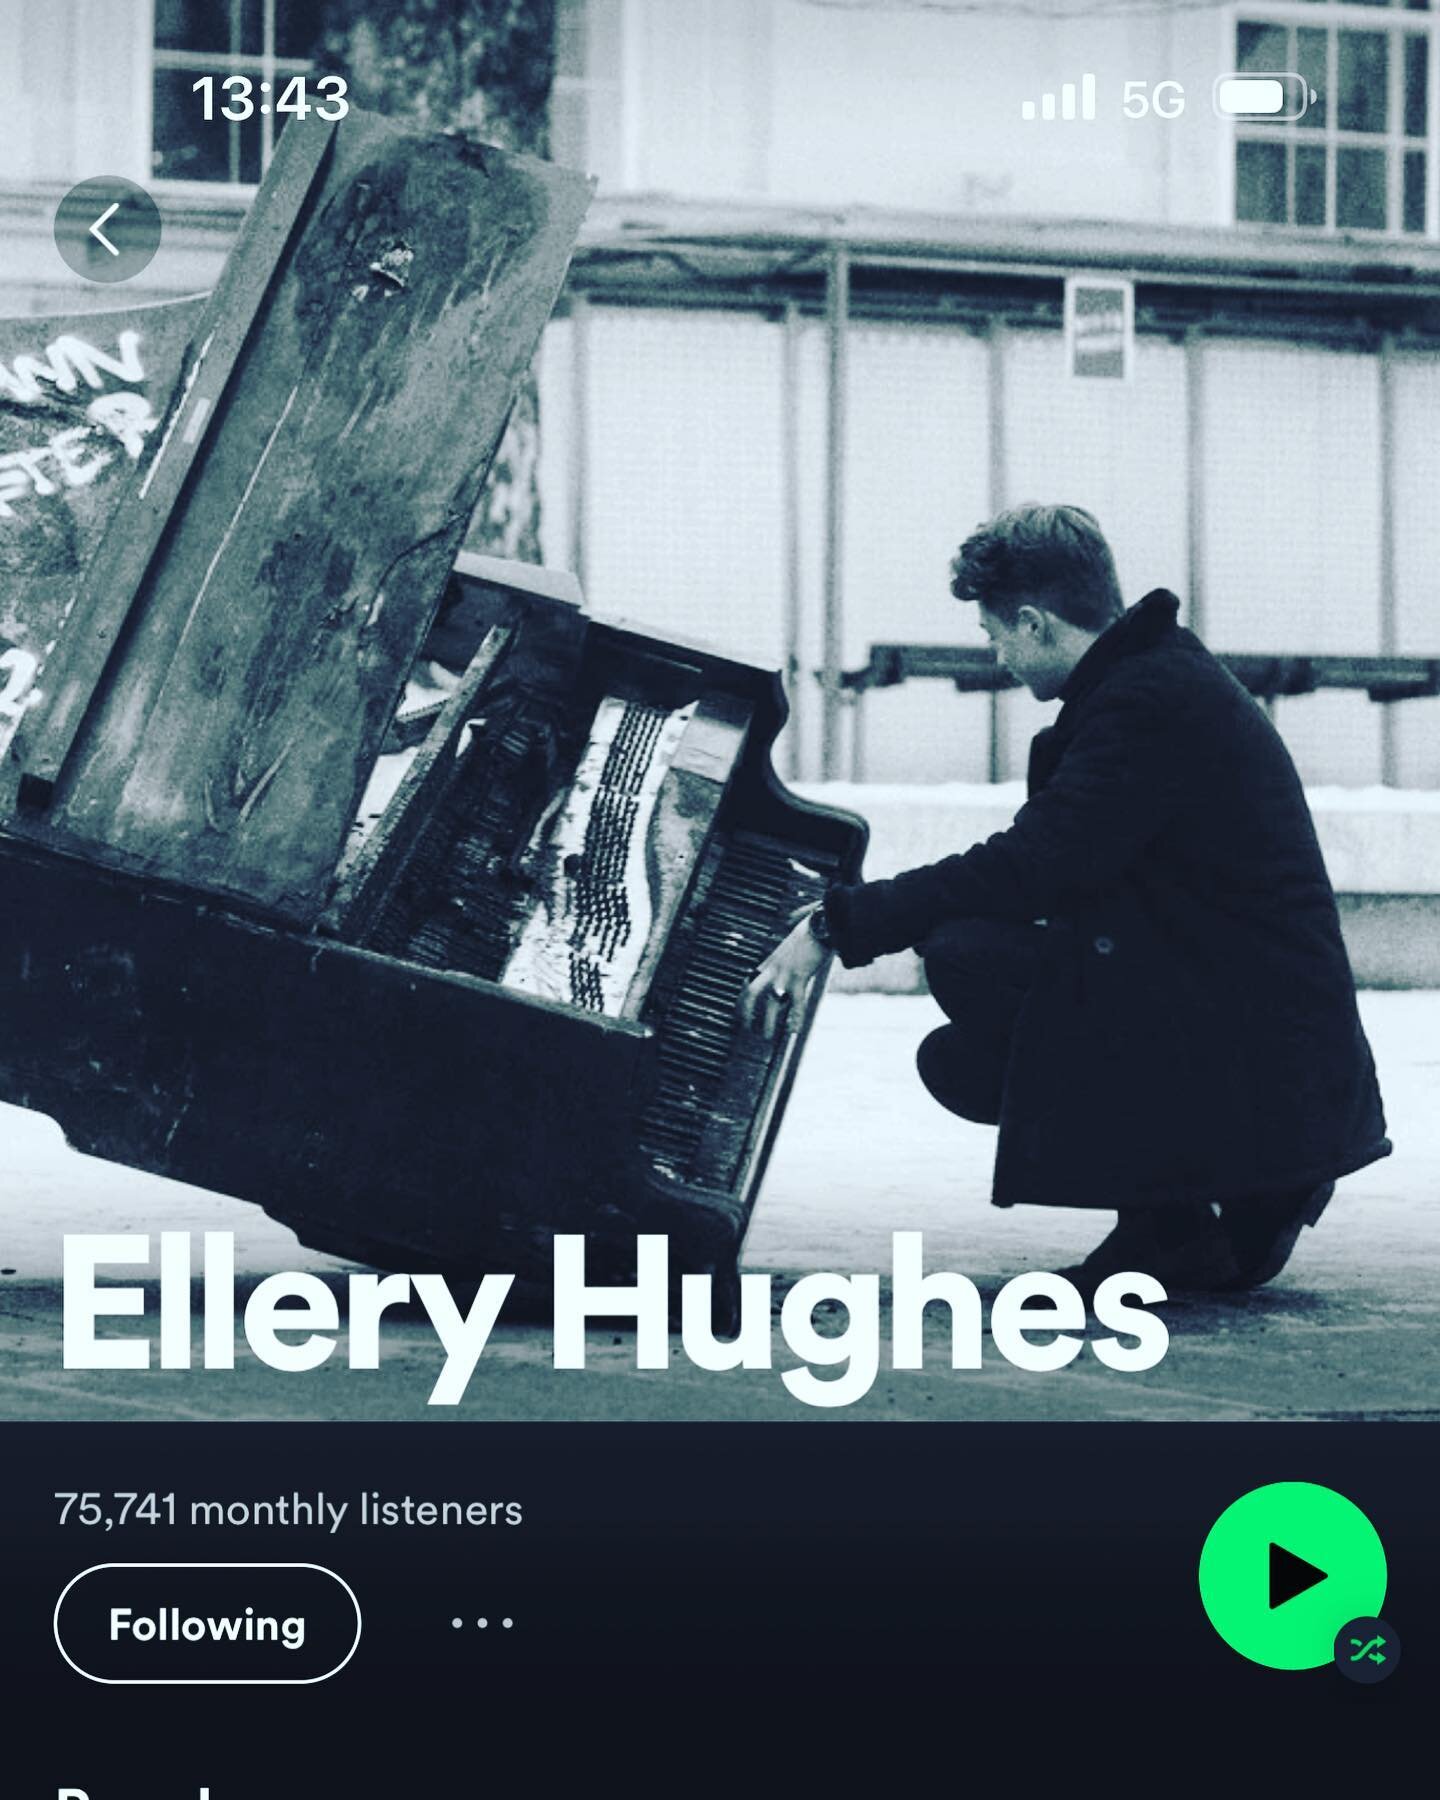 For a while now I&rsquo;ve been posting piano covers as Ellery Hughes. I am Ellery Hughes, Ellery Hughes is me. If you&rsquo;re into relaxing piano check it out. #pianocovers #pianoanimal #elleryhughes #pianoman #covers #chill #background #spotify